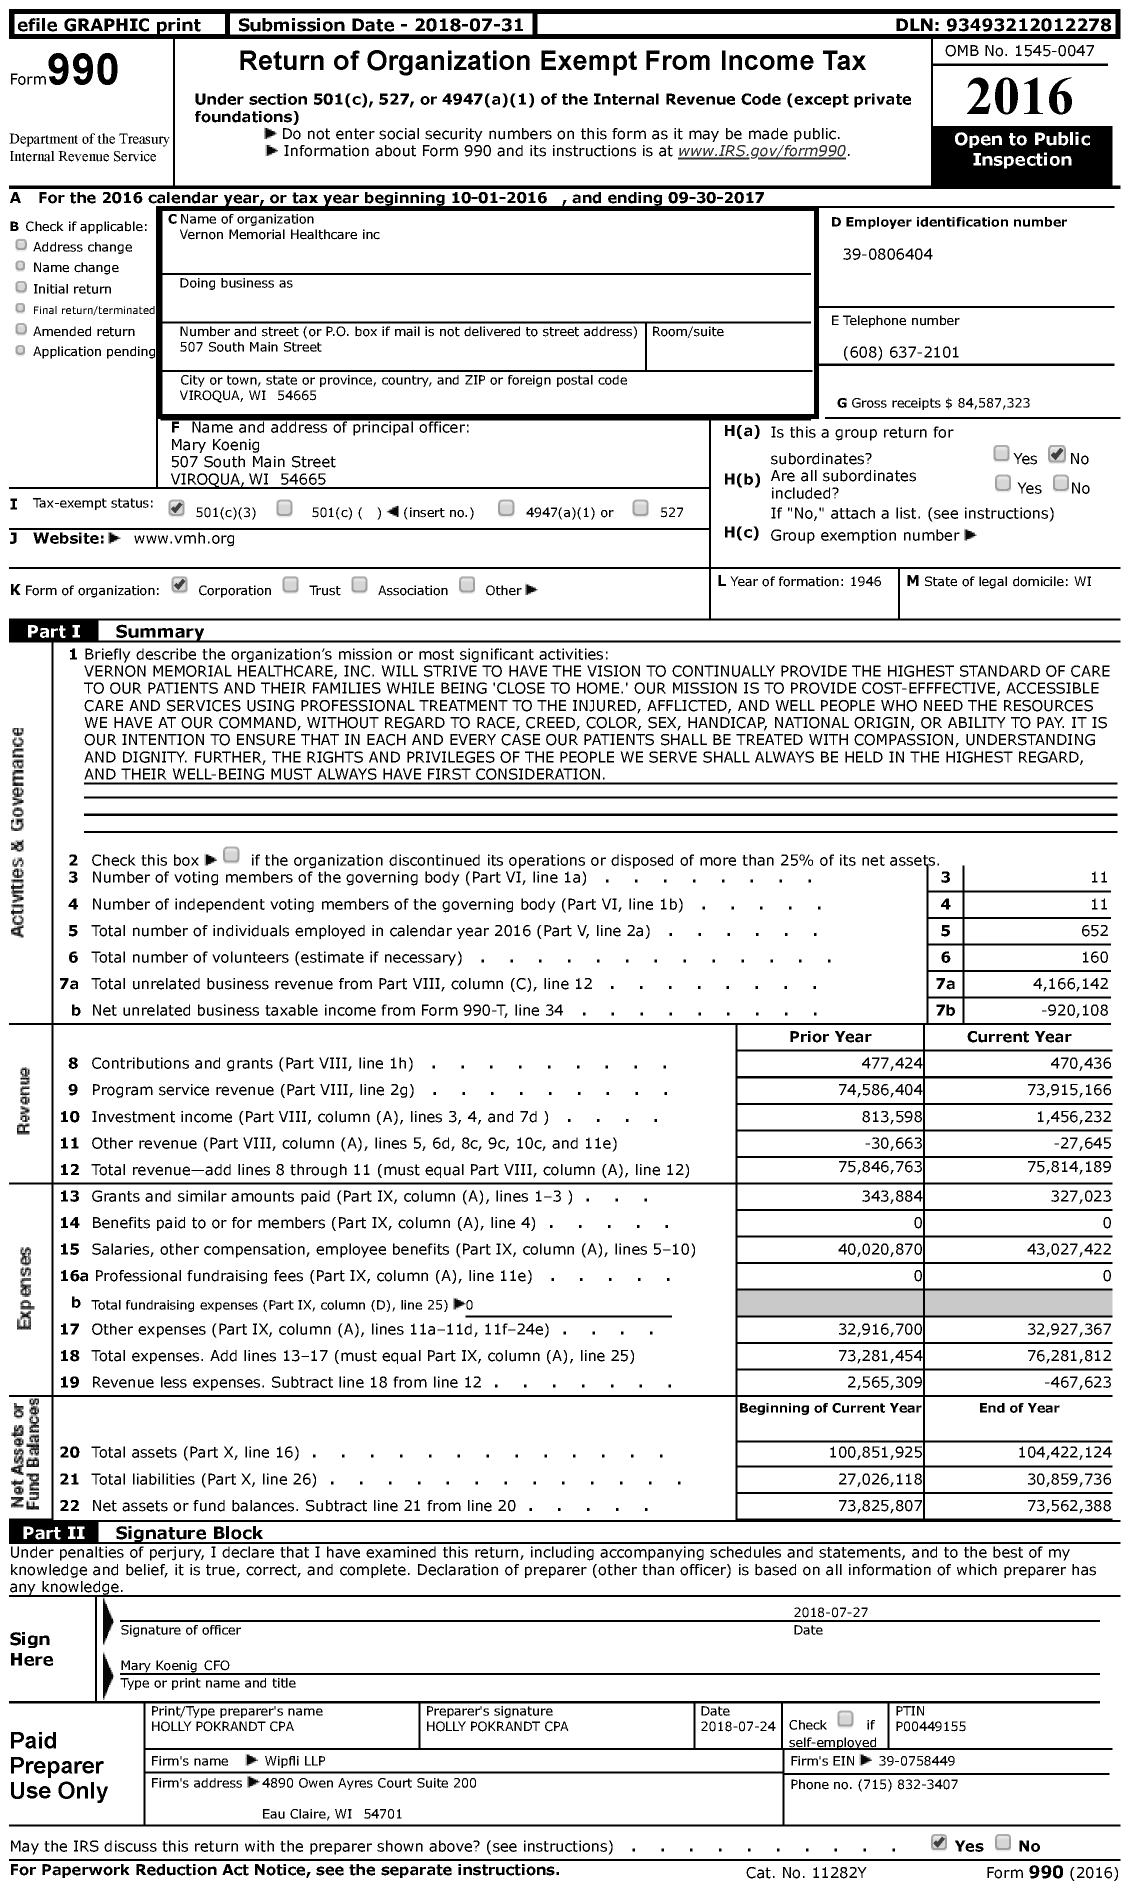 Image of first page of 2016 Form 990 for Vernon Memorial Healthcare (VMH)